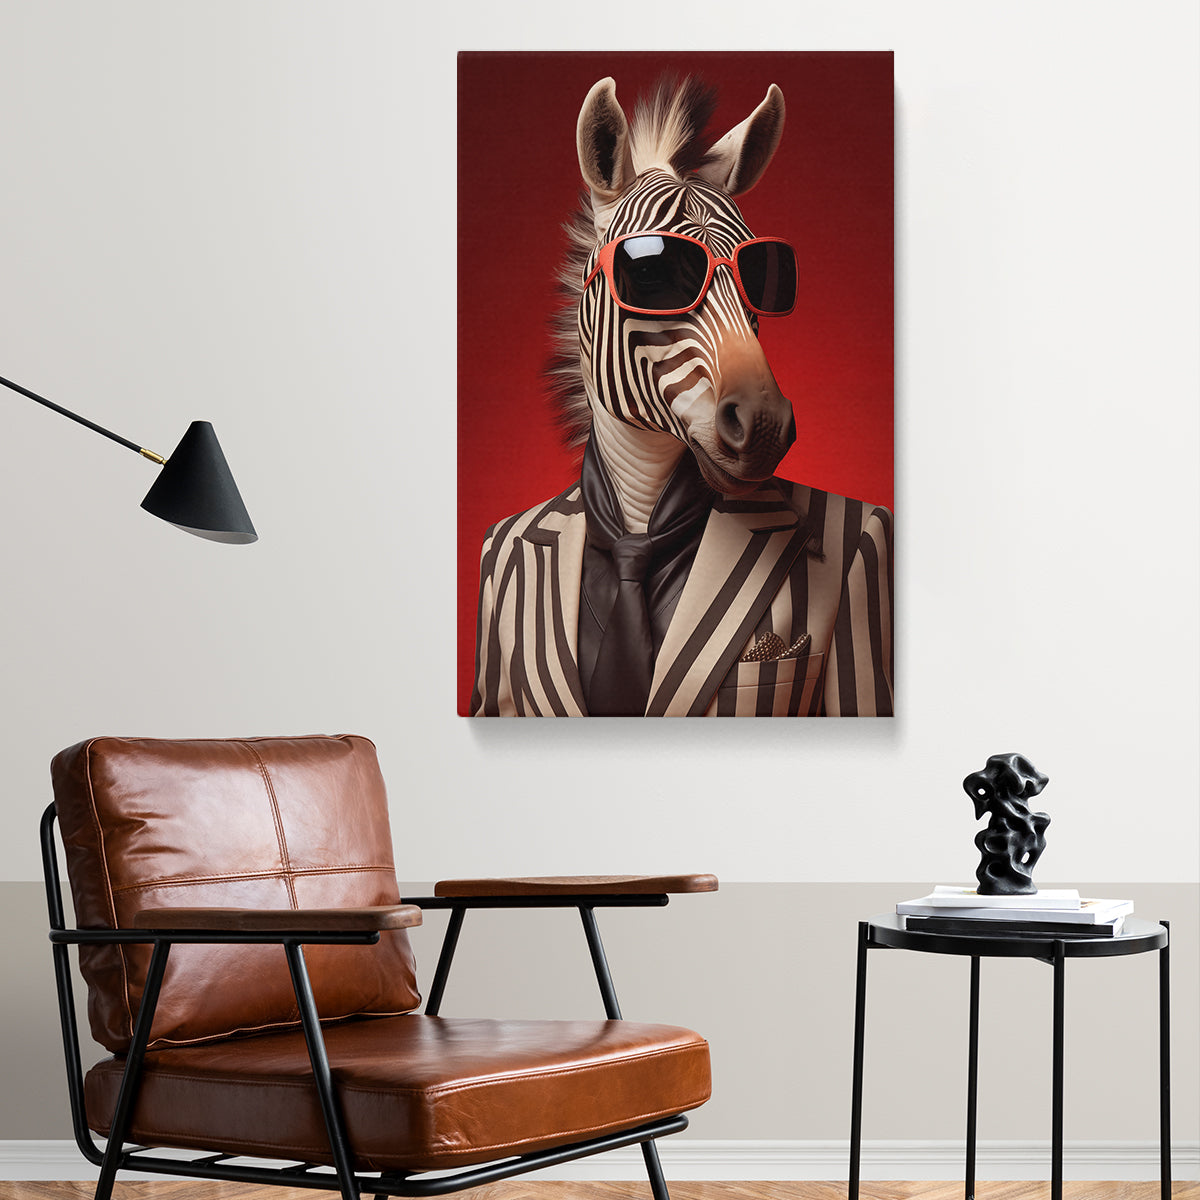 Chic Zebra in Pinstripe Suit, Quirky Animal Art Abstract Art Print Artesty 1 Panel 16"x24" 